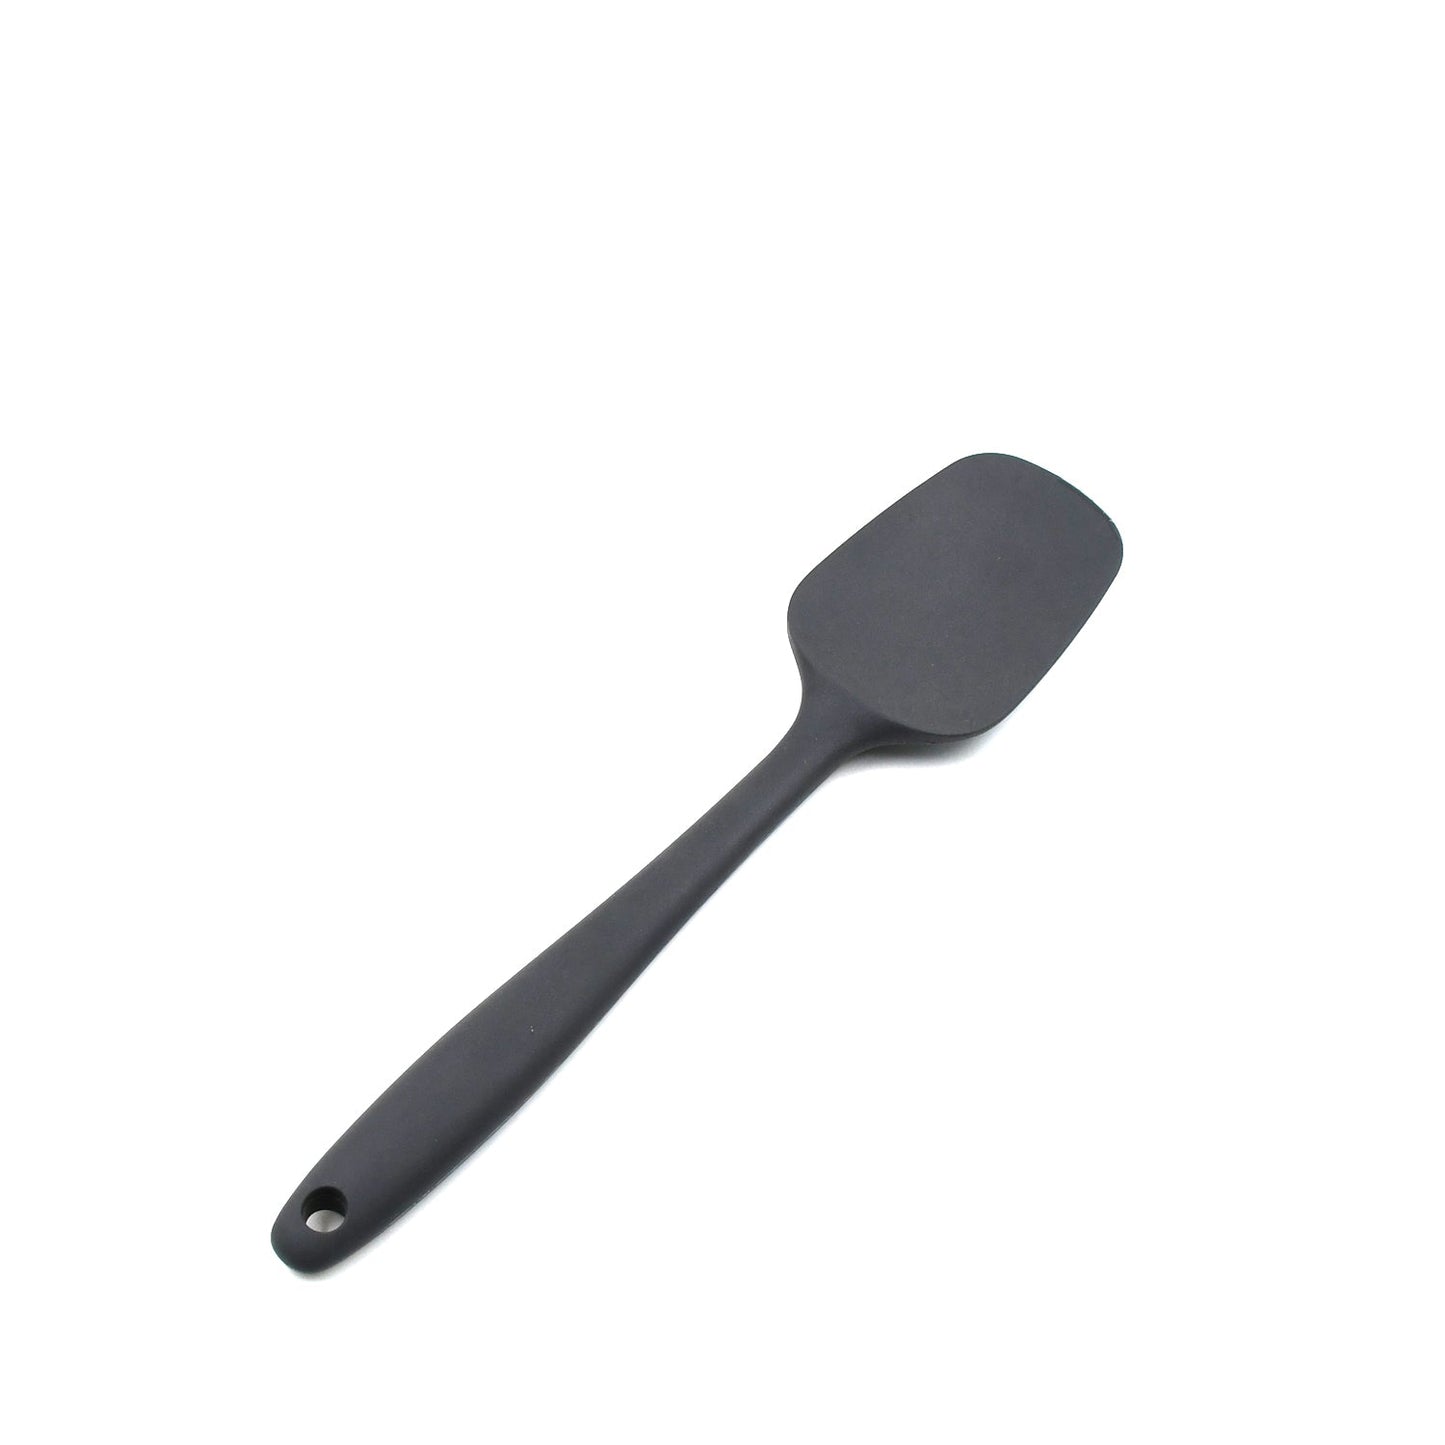 5469 Silicone Spoon Spatula - Non-Stick Rubber Spatula, Scooping and Scraping - Dishwasher Safe and High Heat Resistant (27 cm)